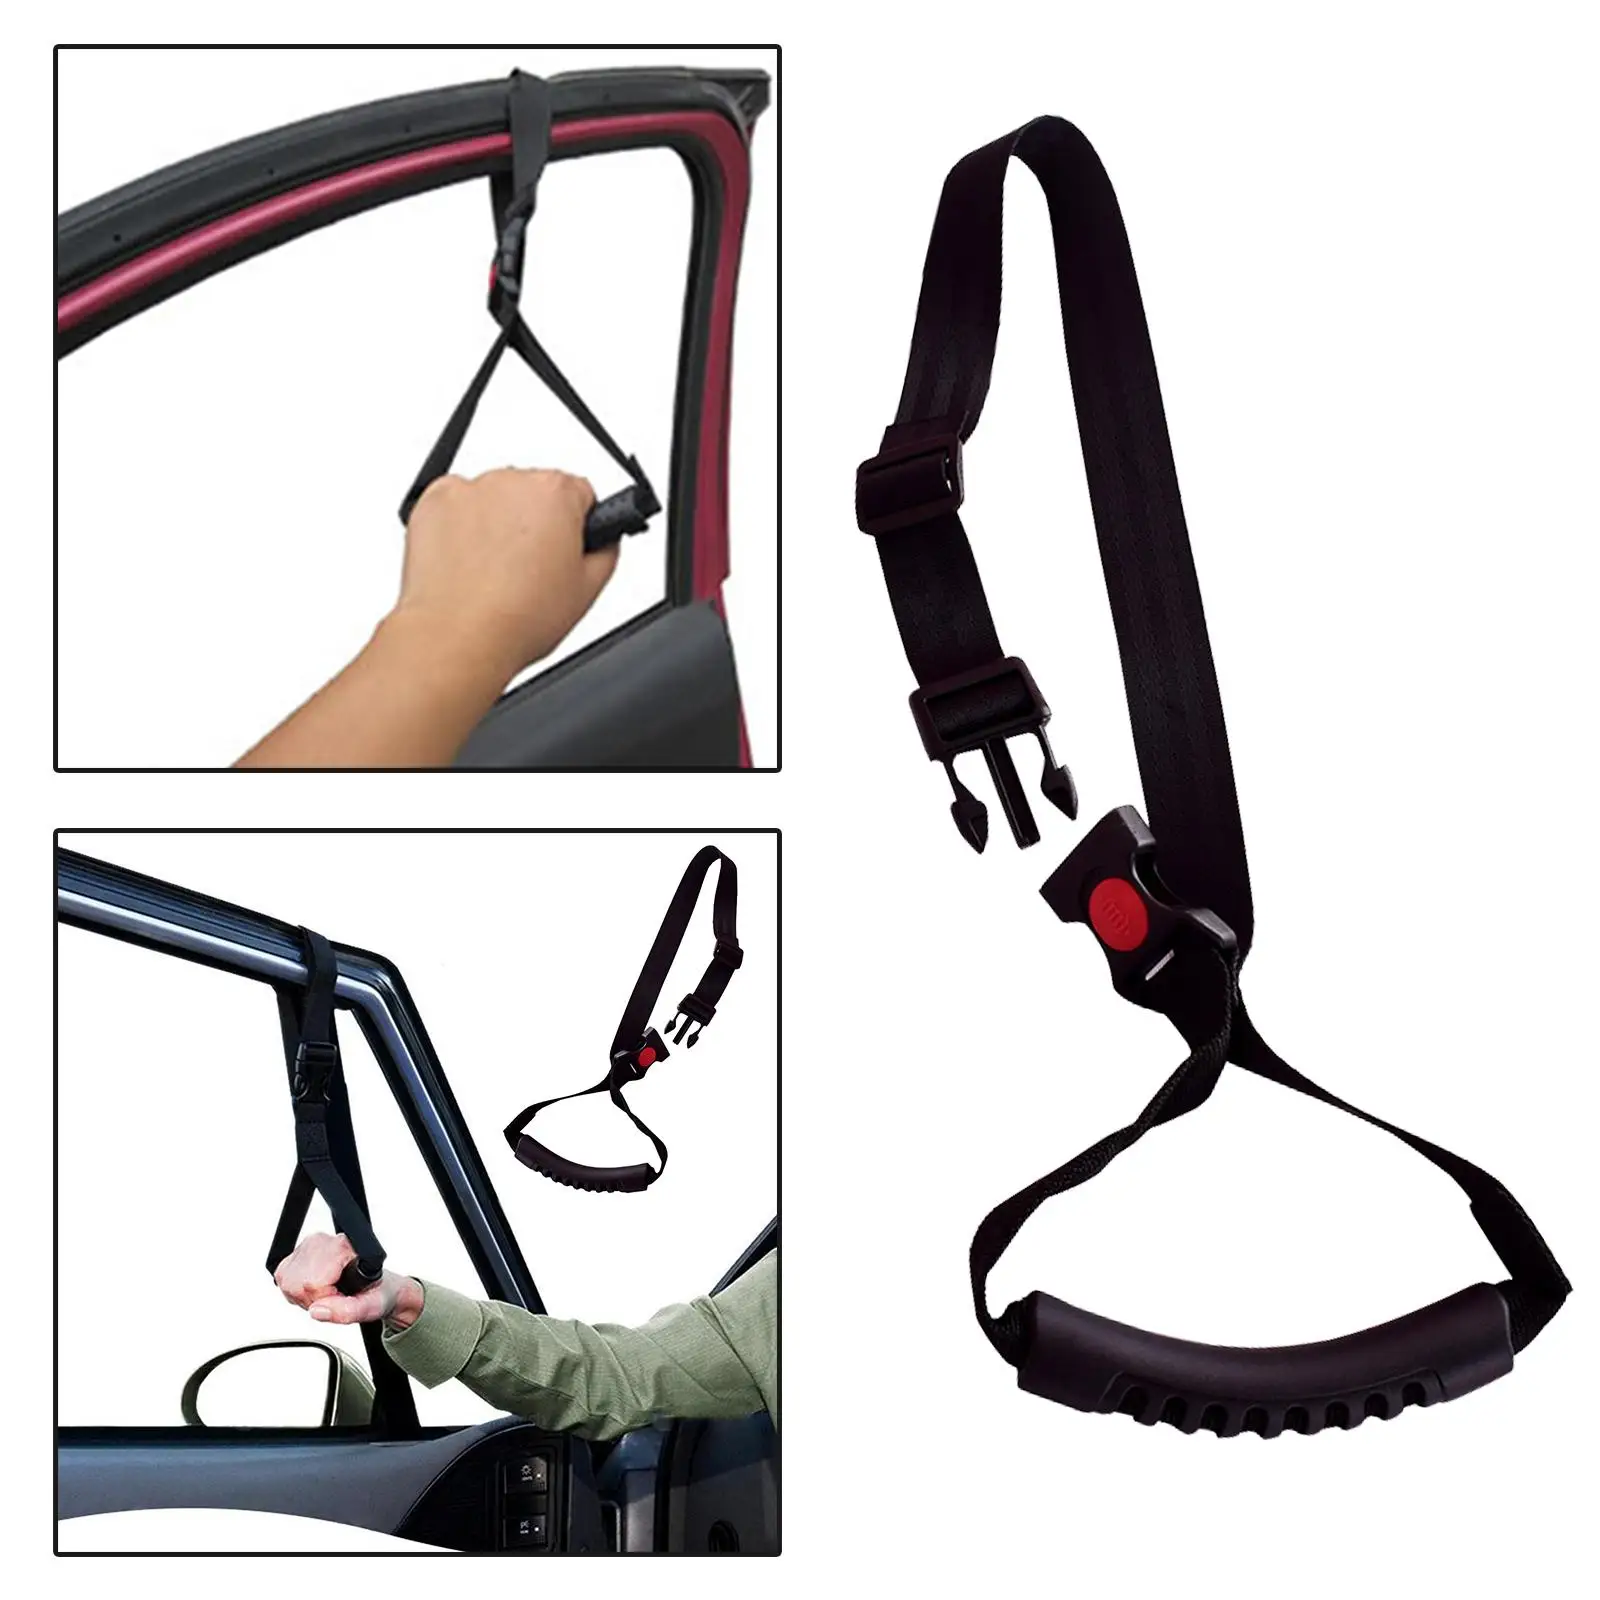  Handle Adjustable Standing Aid Vehicle Support Disability Help